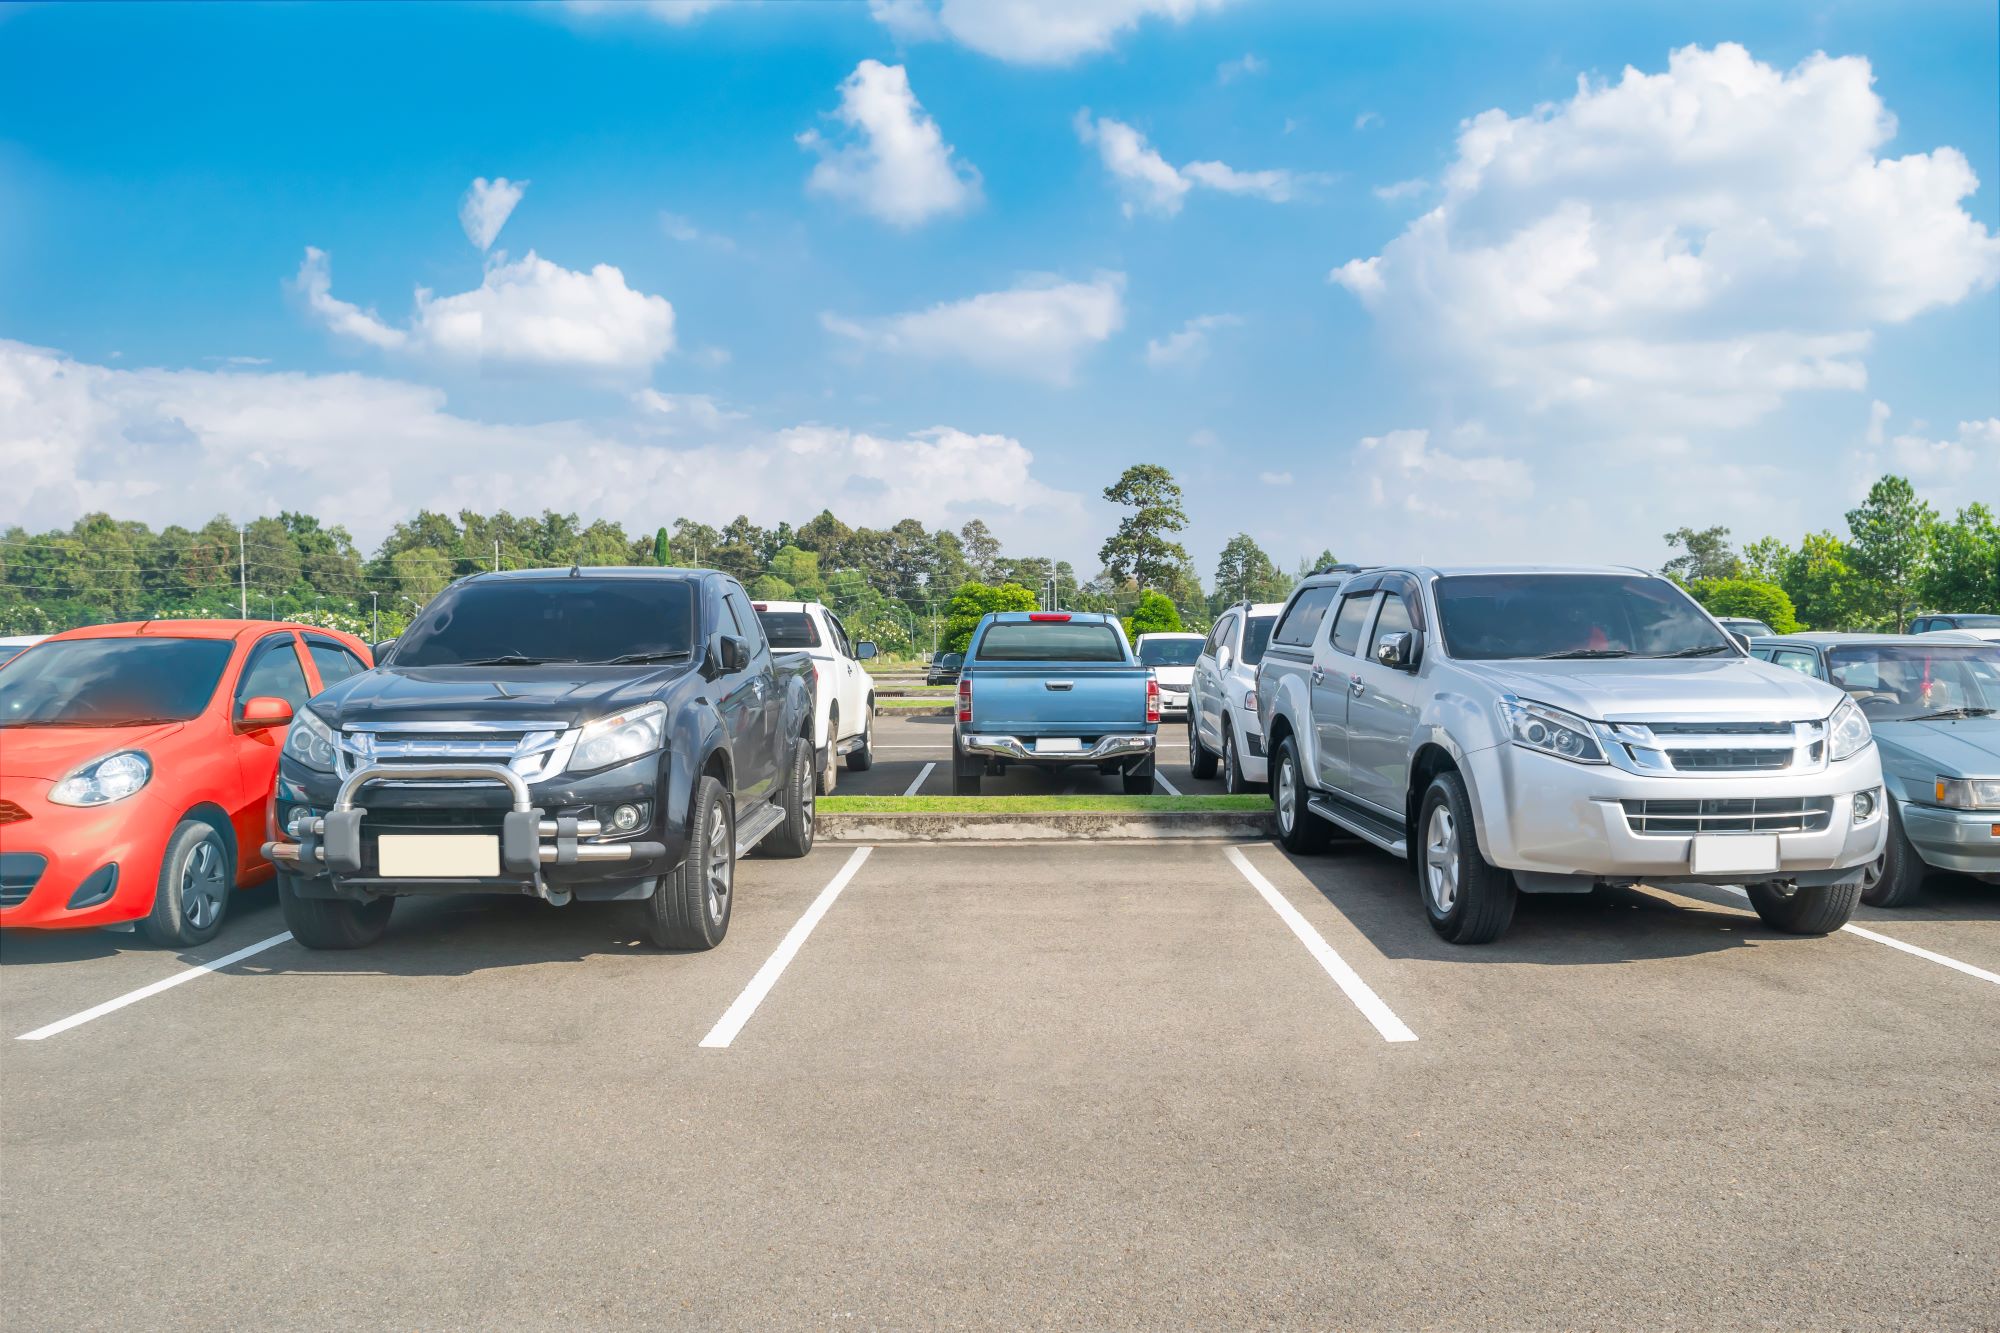 Airport Parking Etiquette: Being a Courteous Park-and-Fly Neighbor